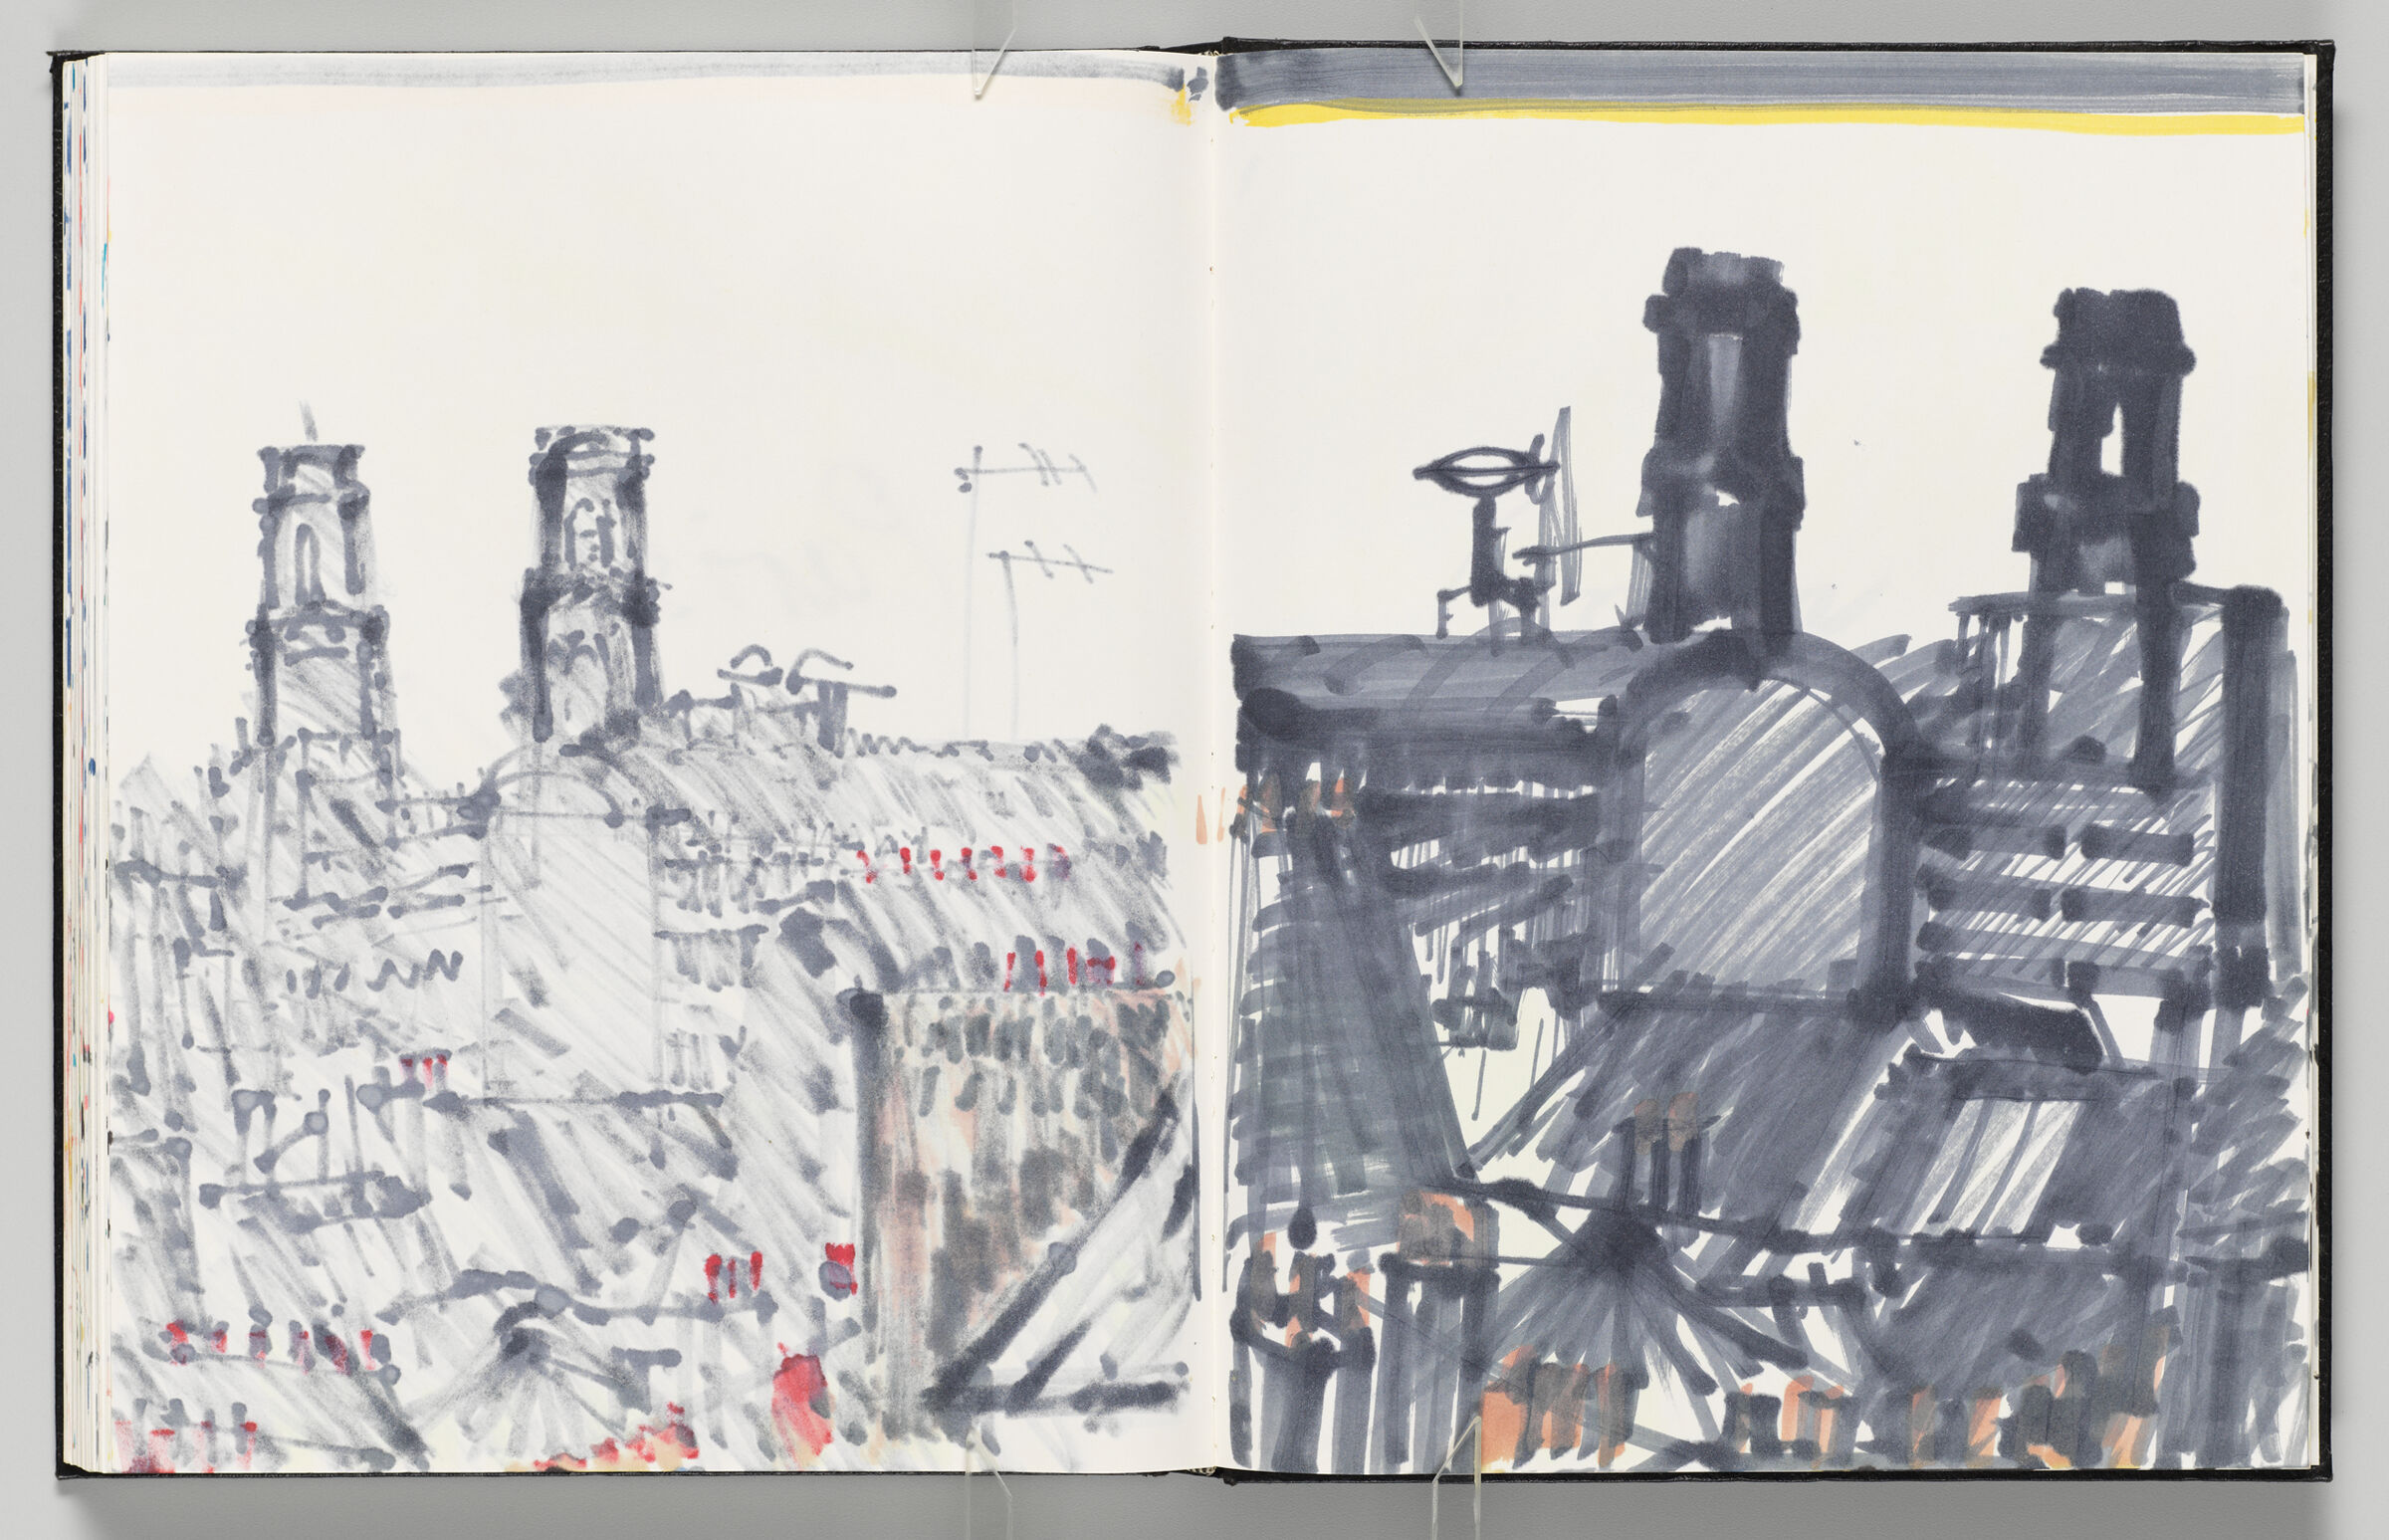 Untitled (Bleed-Through Of Previous Page, Left Page); Untitled (View Of Paris, Right Page)